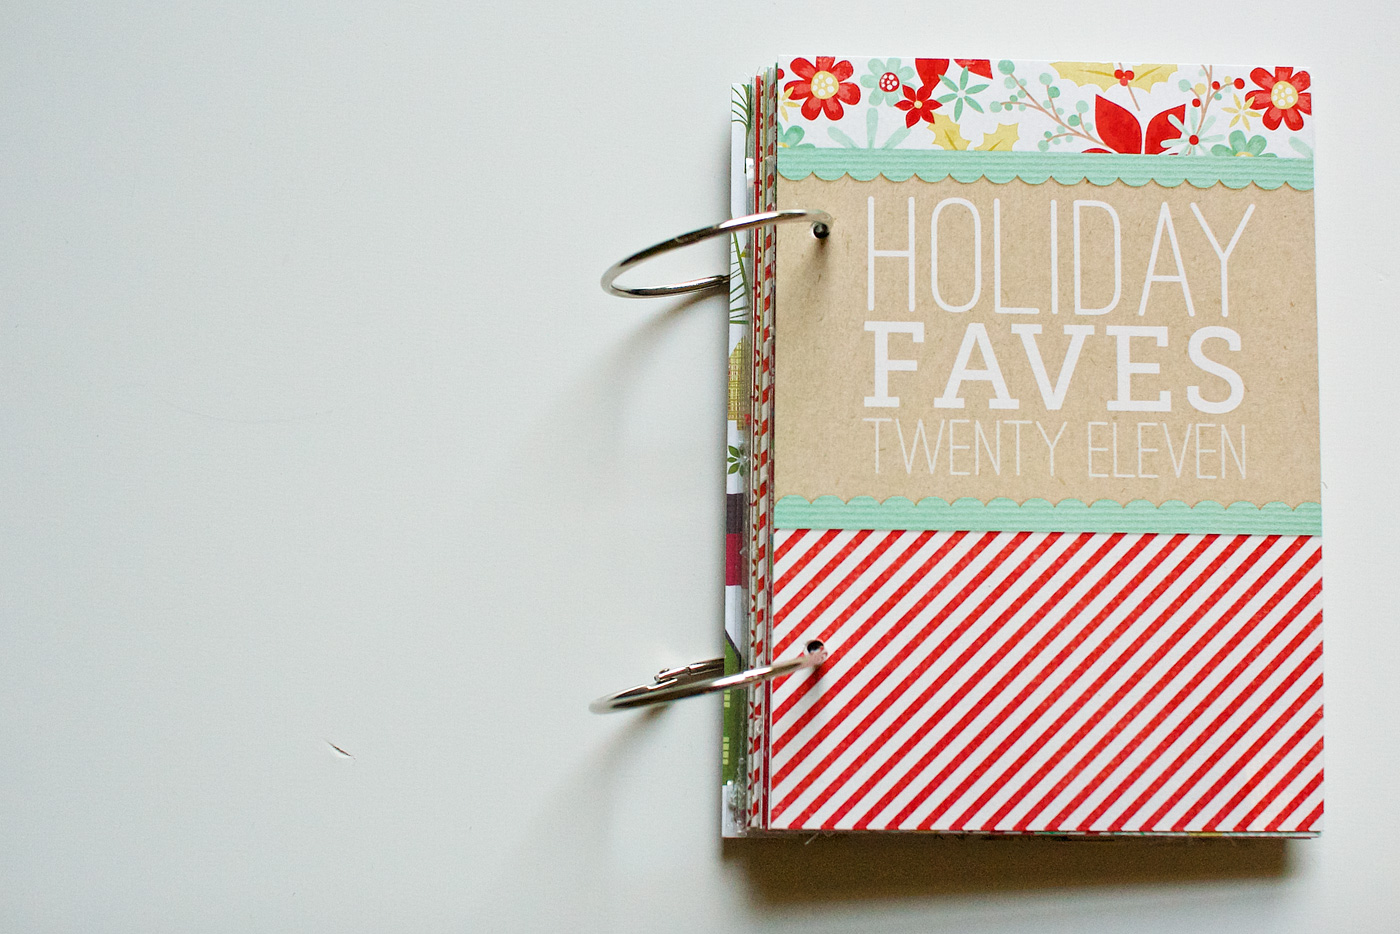 nettiodesigns_Holiday-Faves-2014-Story5